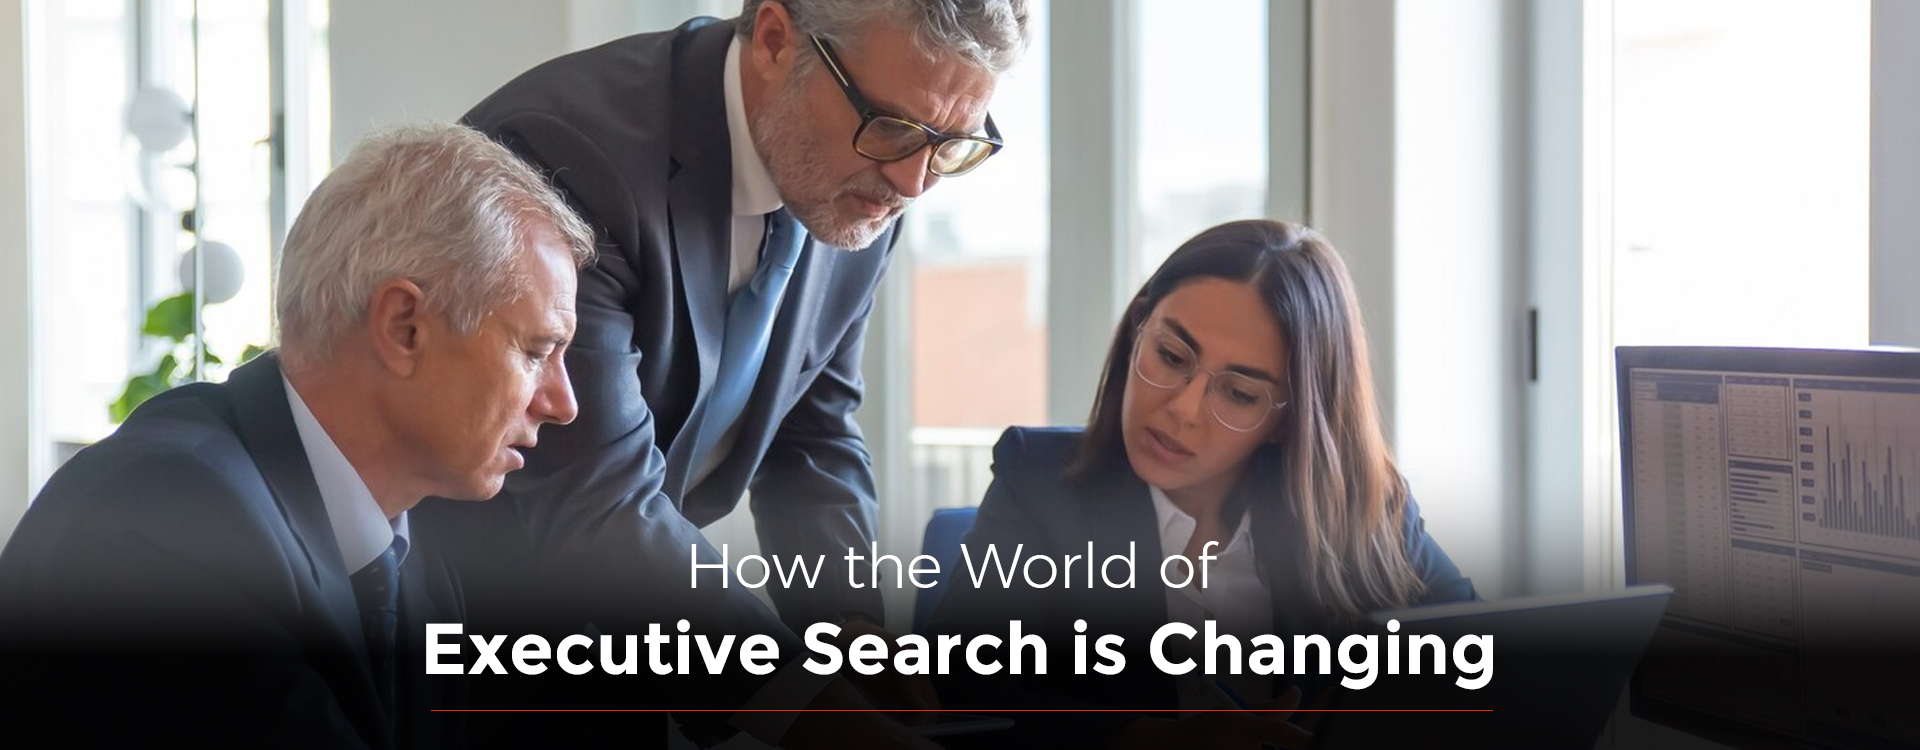 How the World of Executive Search is Changing